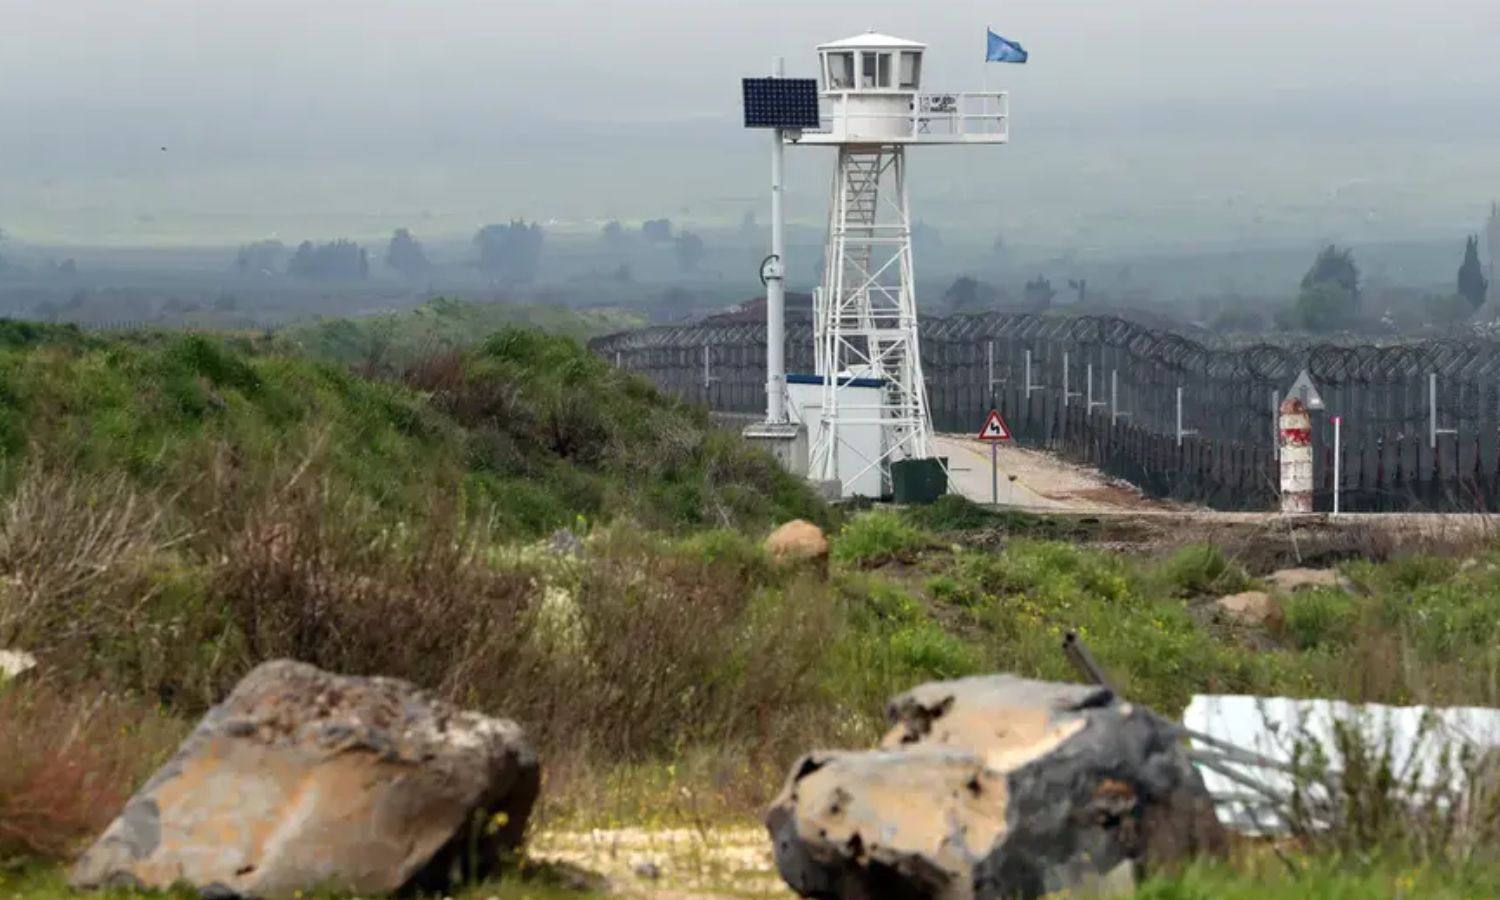 A watchtower belonging to United Nations peacekeeping forces next to the Quneitra crossing near the ceasefire line between Israel and Syria in the occupied Syrian Golan Heights - March 25, 2019 (Reuters)